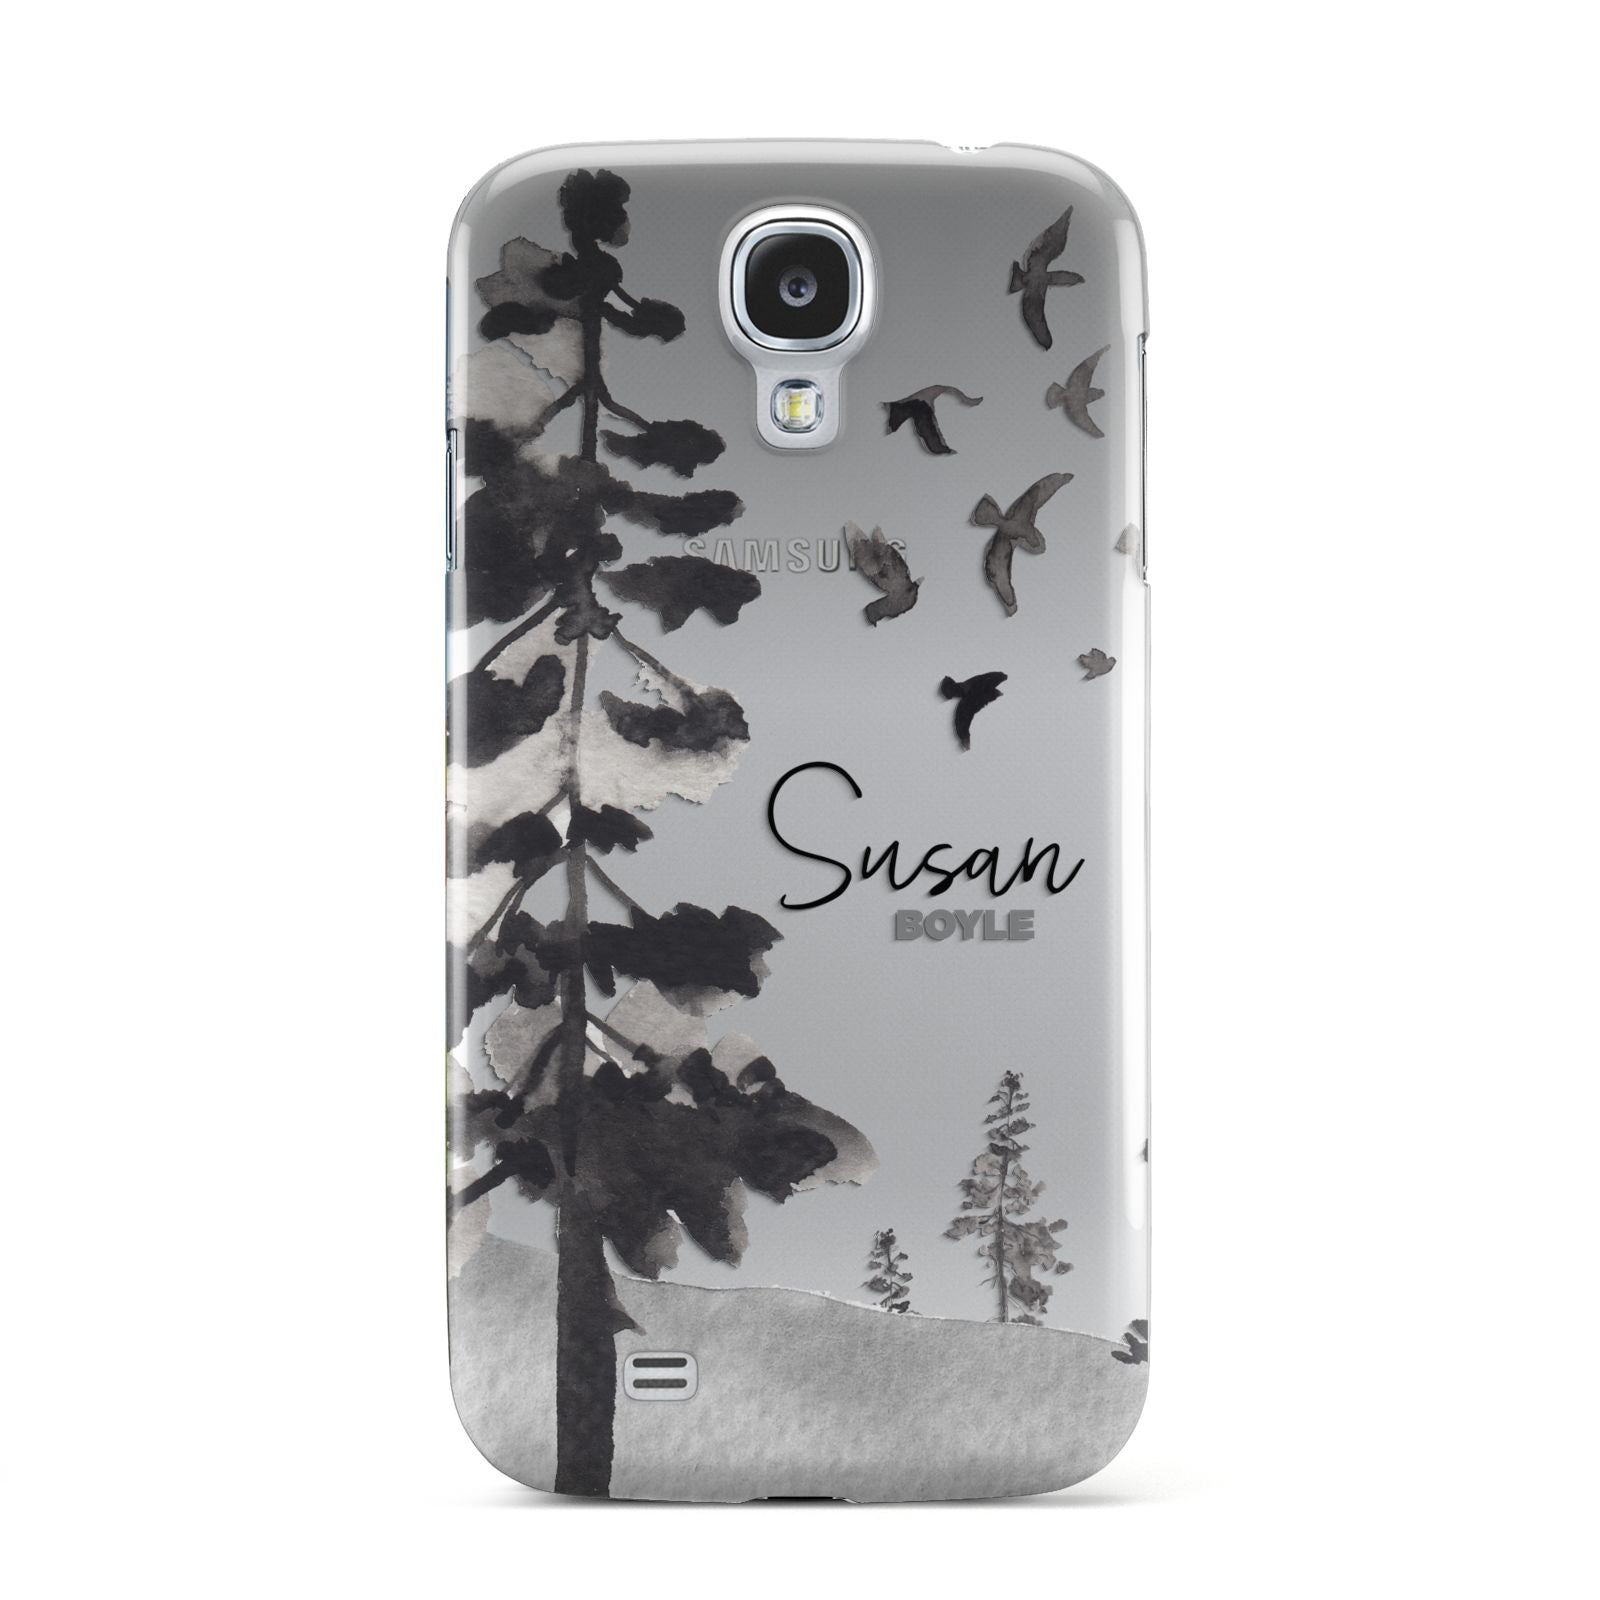 Personalised Monochrome Forest Samsung Galaxy S4 Case